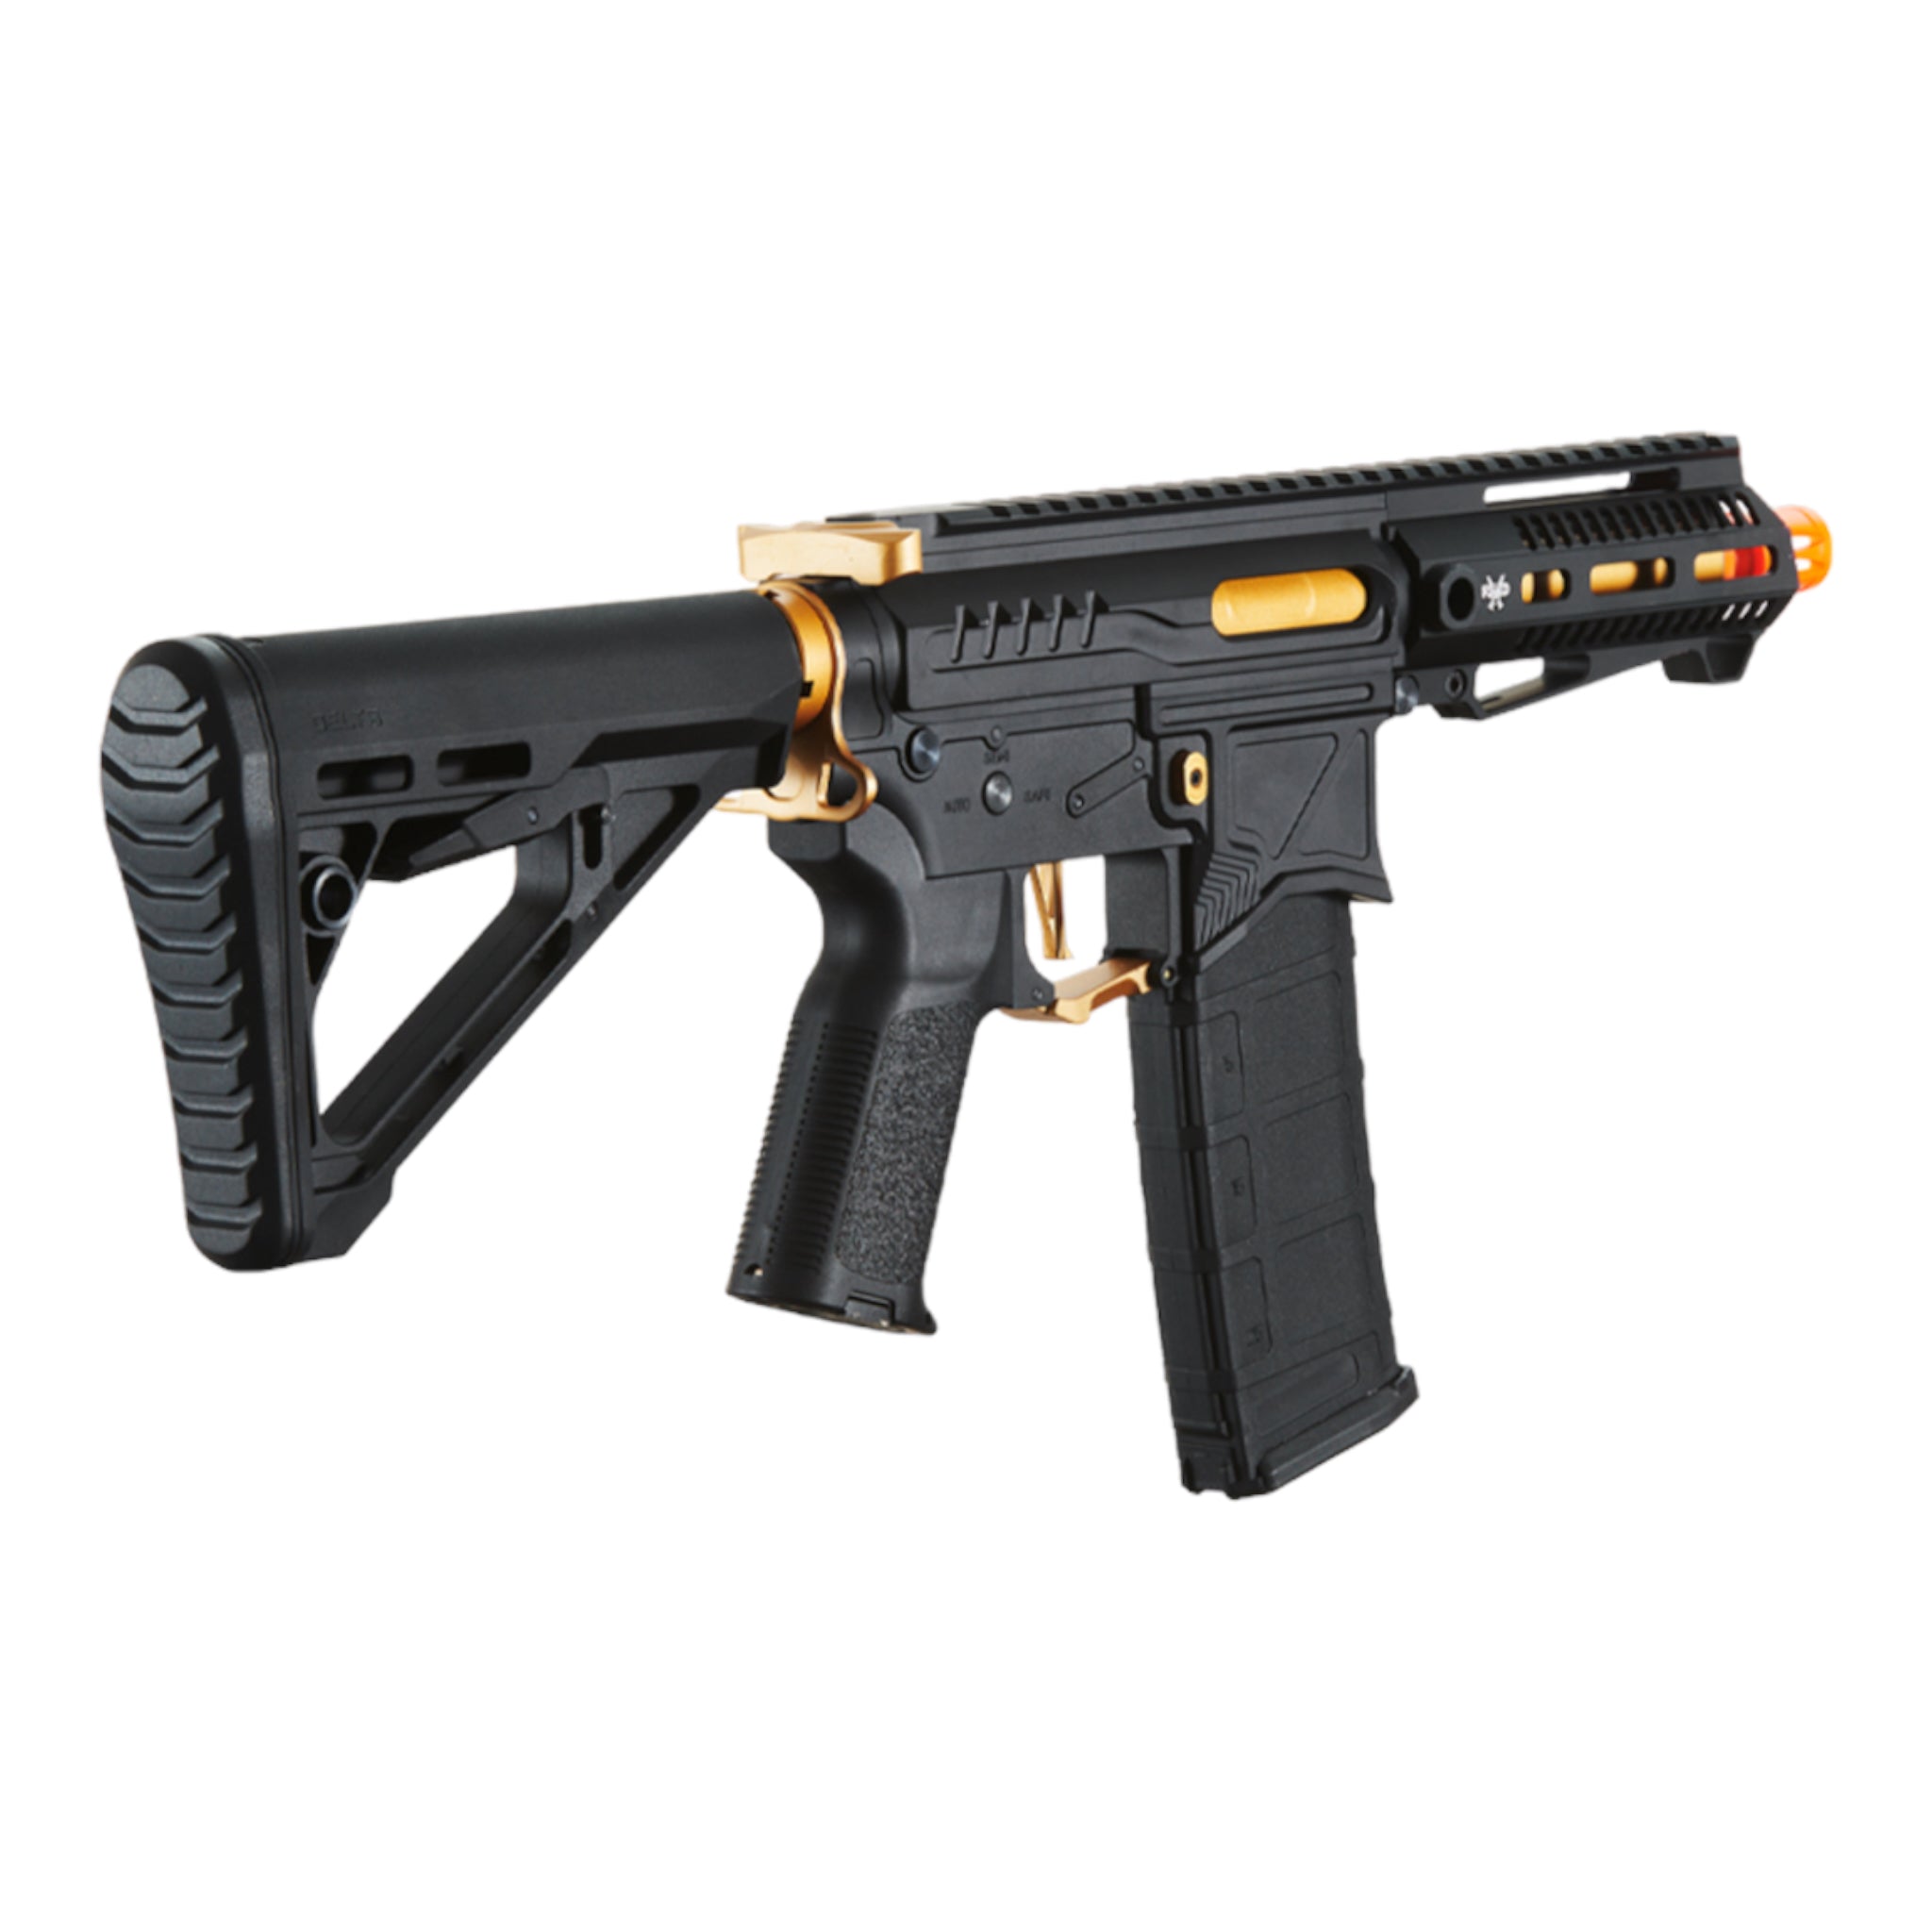 Zion Arms R15 Mod 1 Short Barrel Airsoft Rifle with Delta Stock (Black & Gold) - ssairsoft